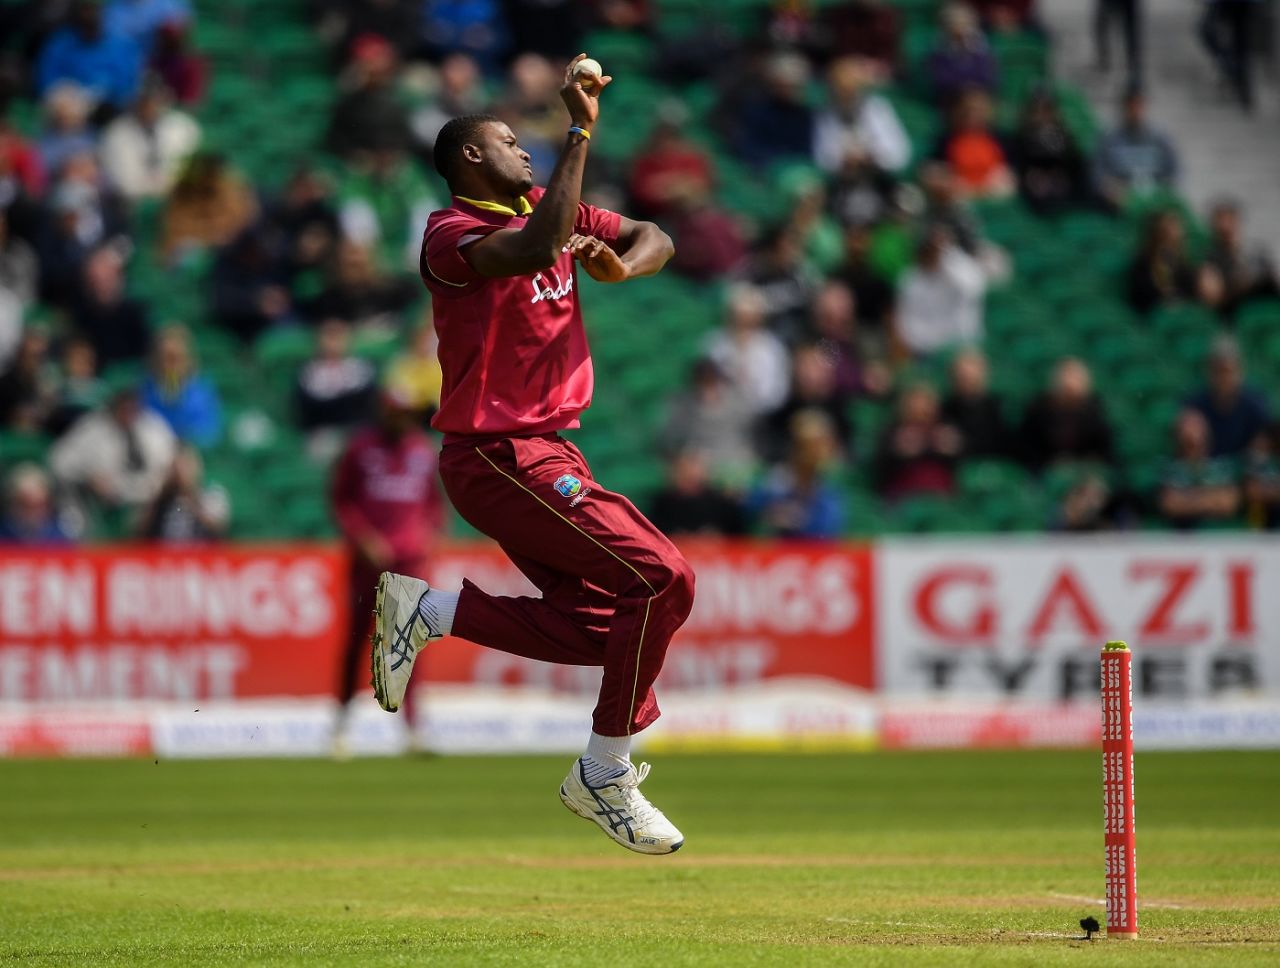 Jason Holder in his delivery stride, Ireland v West Indies, Match 4, Ireland tri-series, Dublin, May 11, 2019